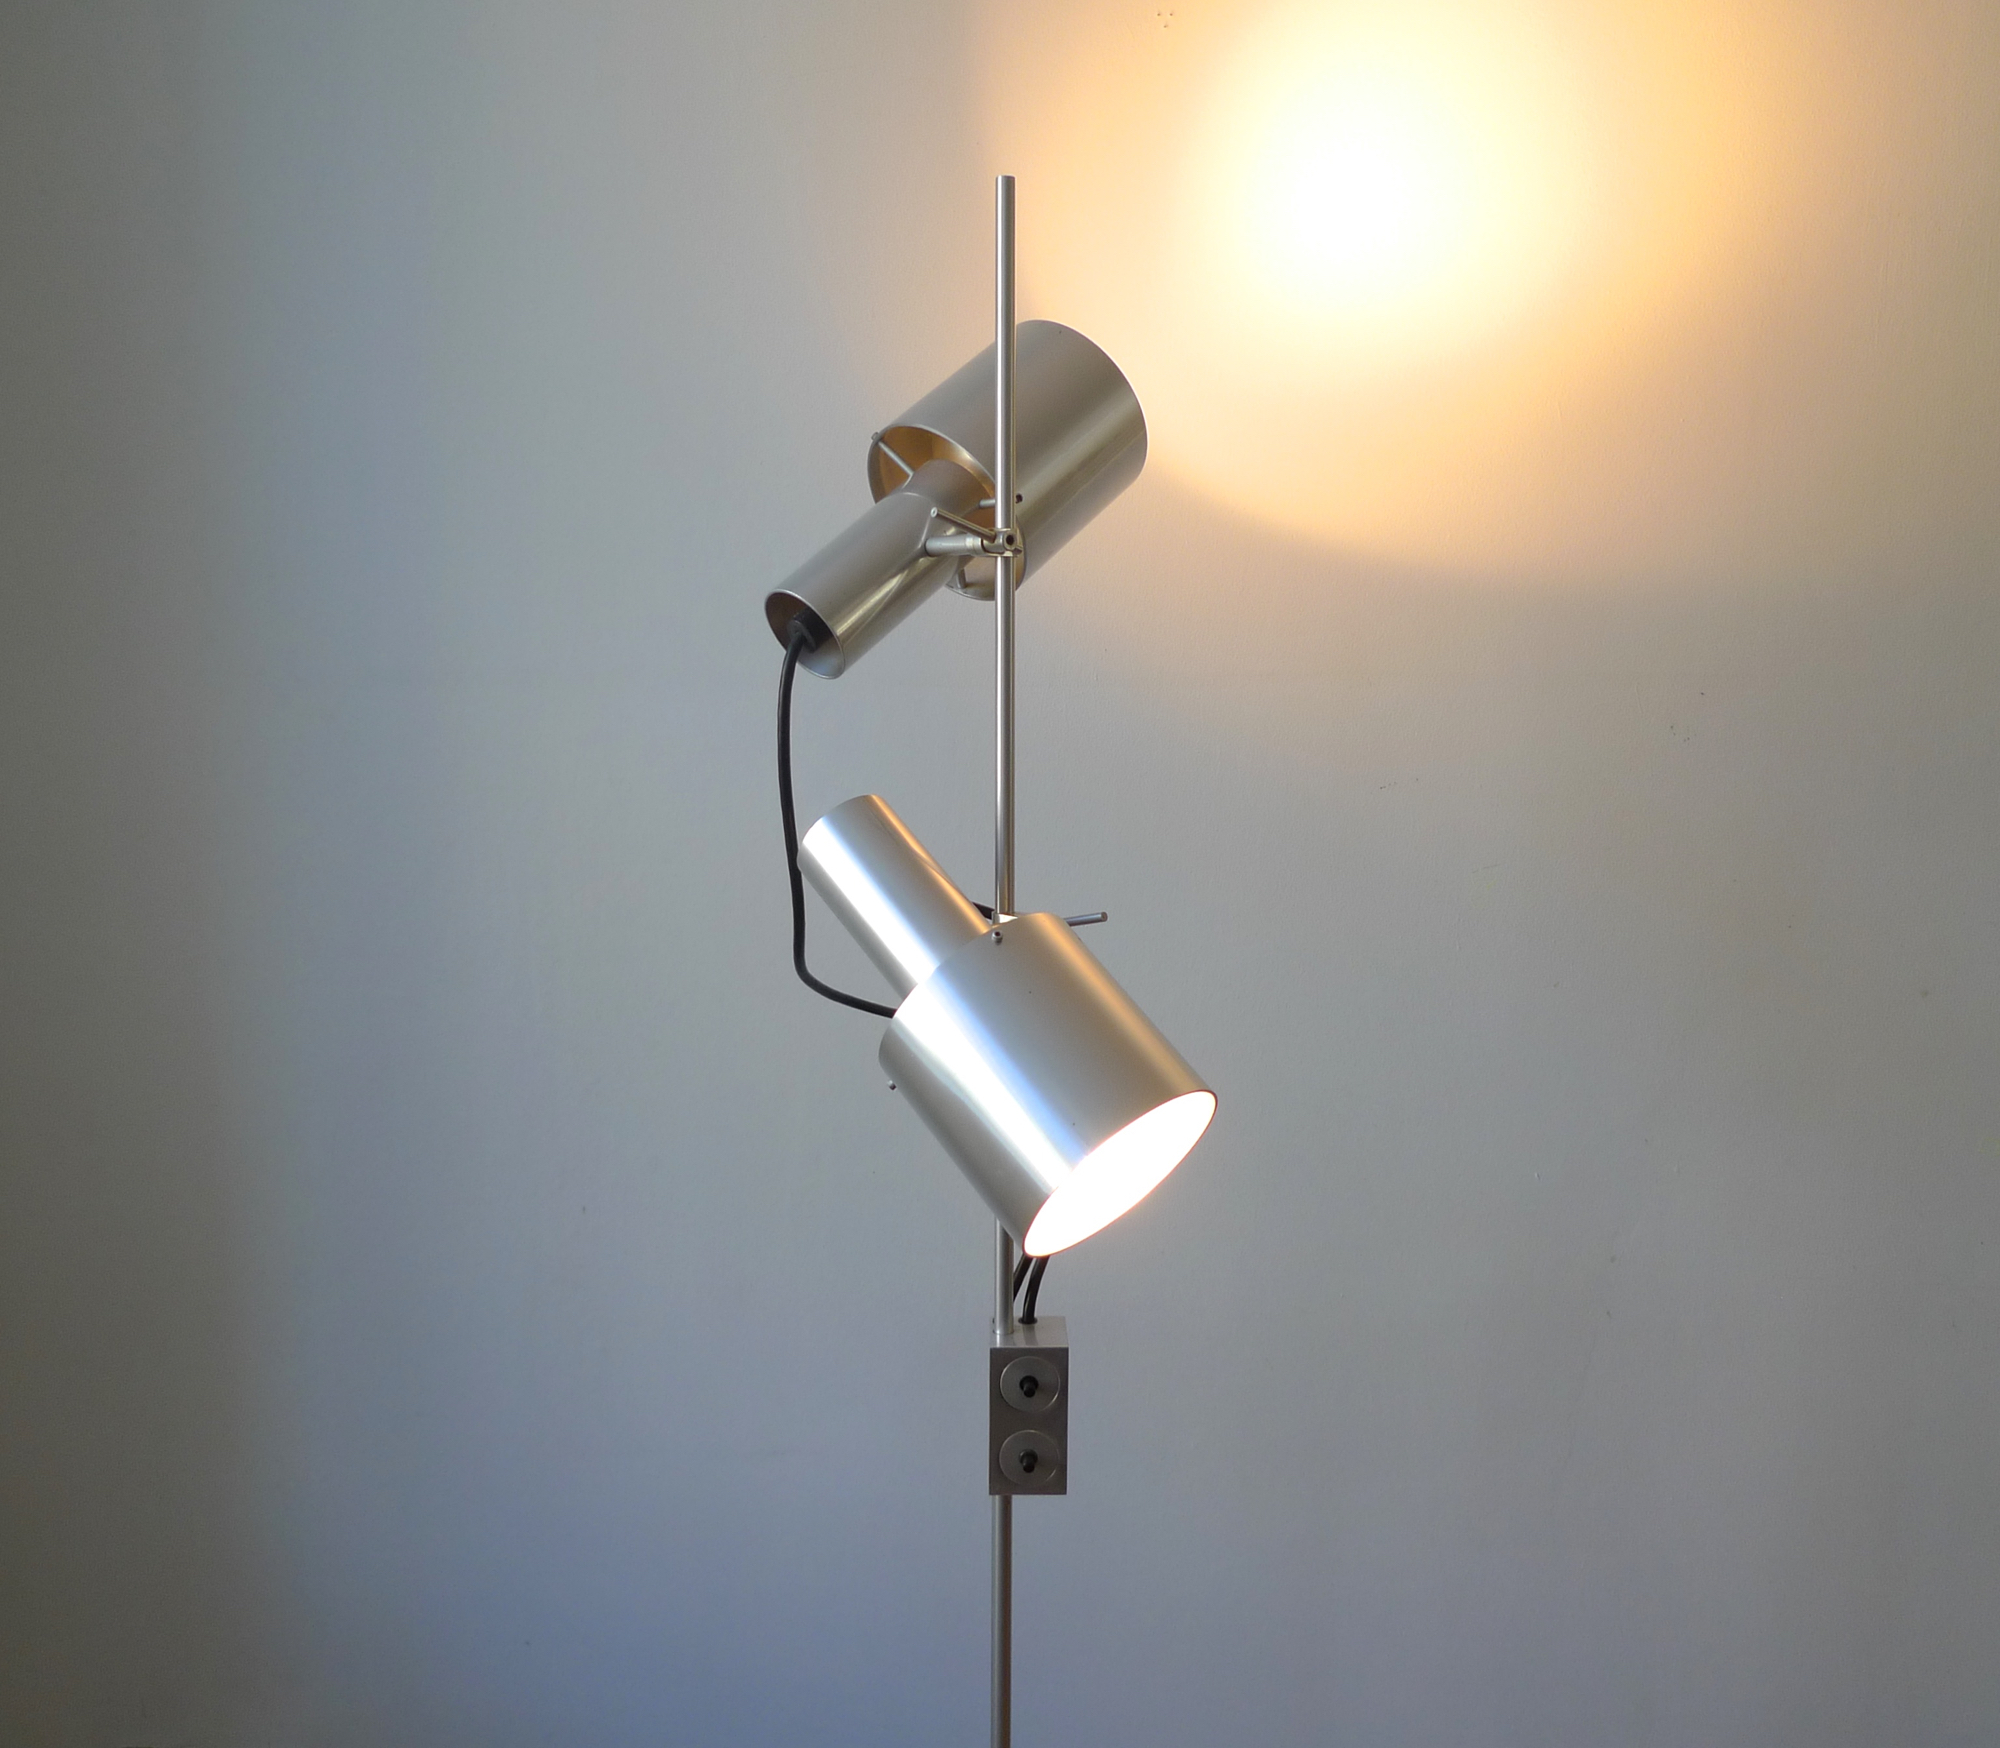 PETER NELSON TA STANDARD LAMP by ARCHITECTURAL LIGHTING Ltd, 1967